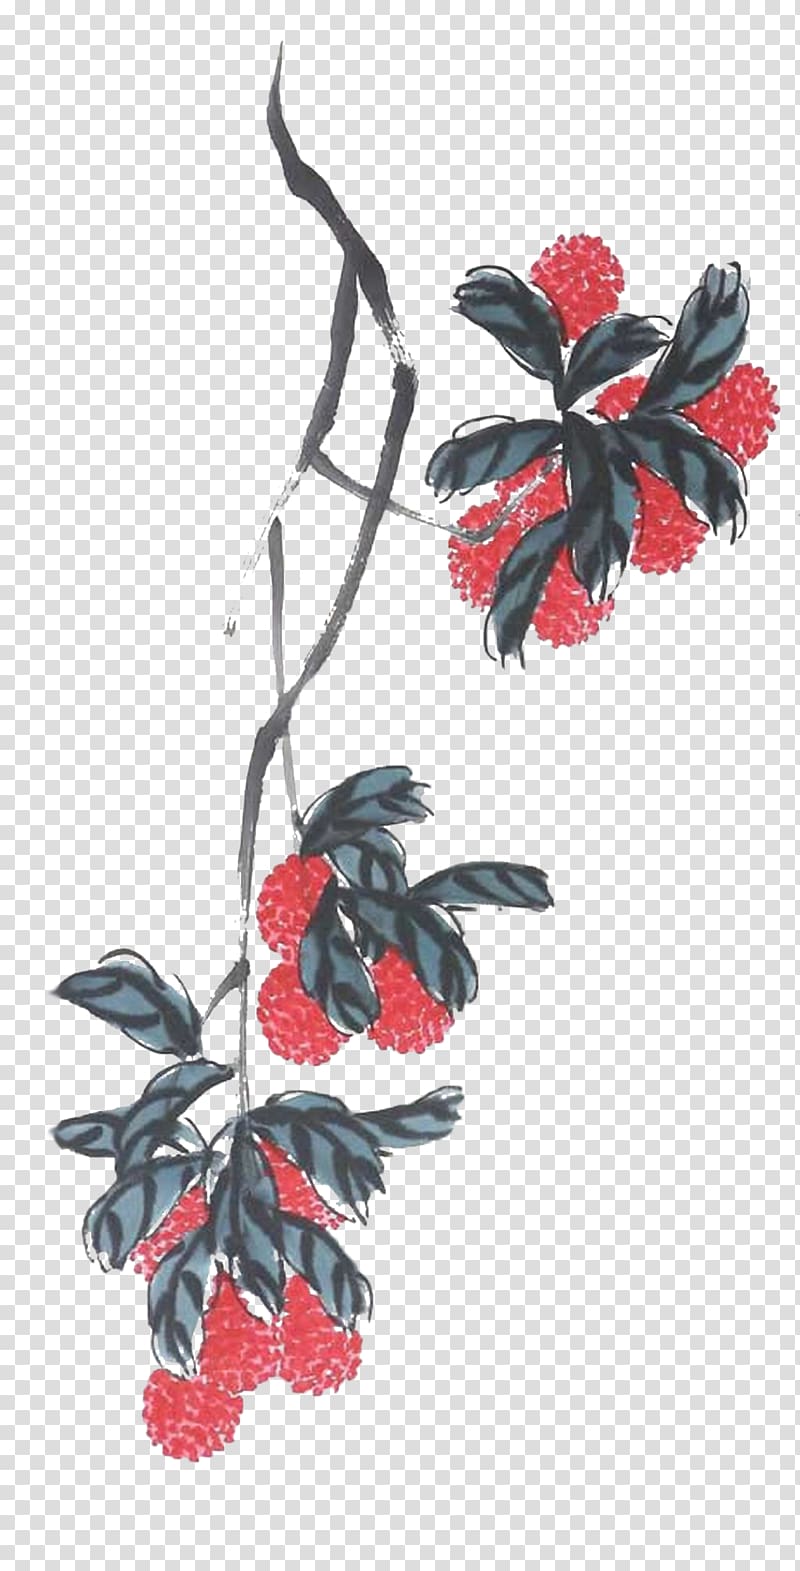 Lychee Ink brush Ink wash painting, A lily on a string of lychee transparent background PNG clipart